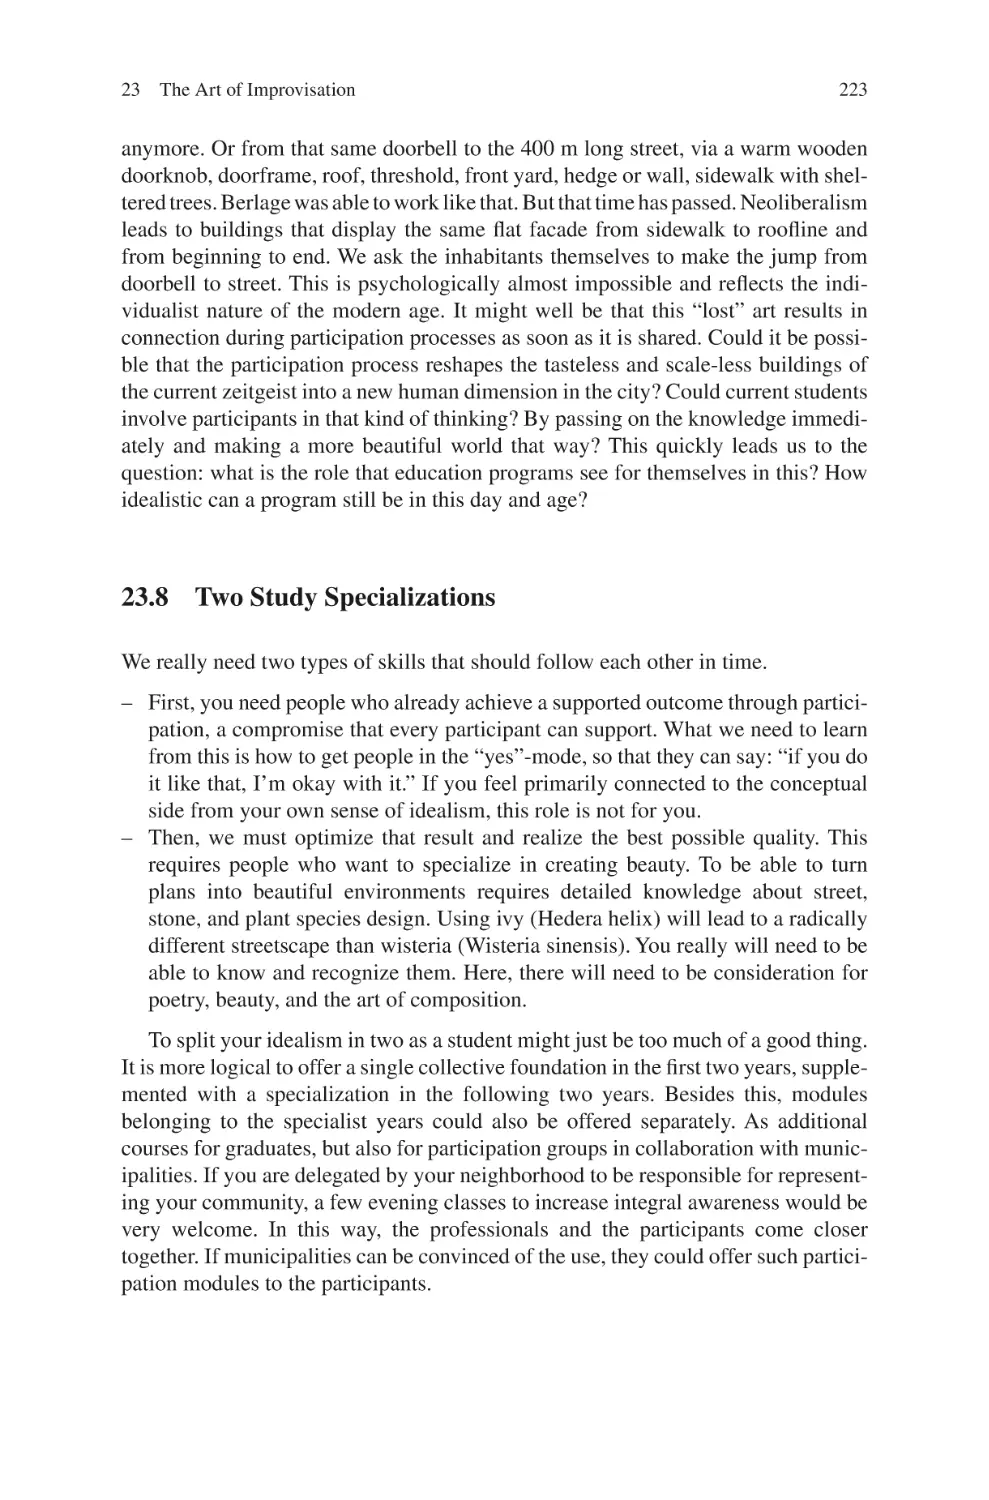 23.8 Two Study Specializations